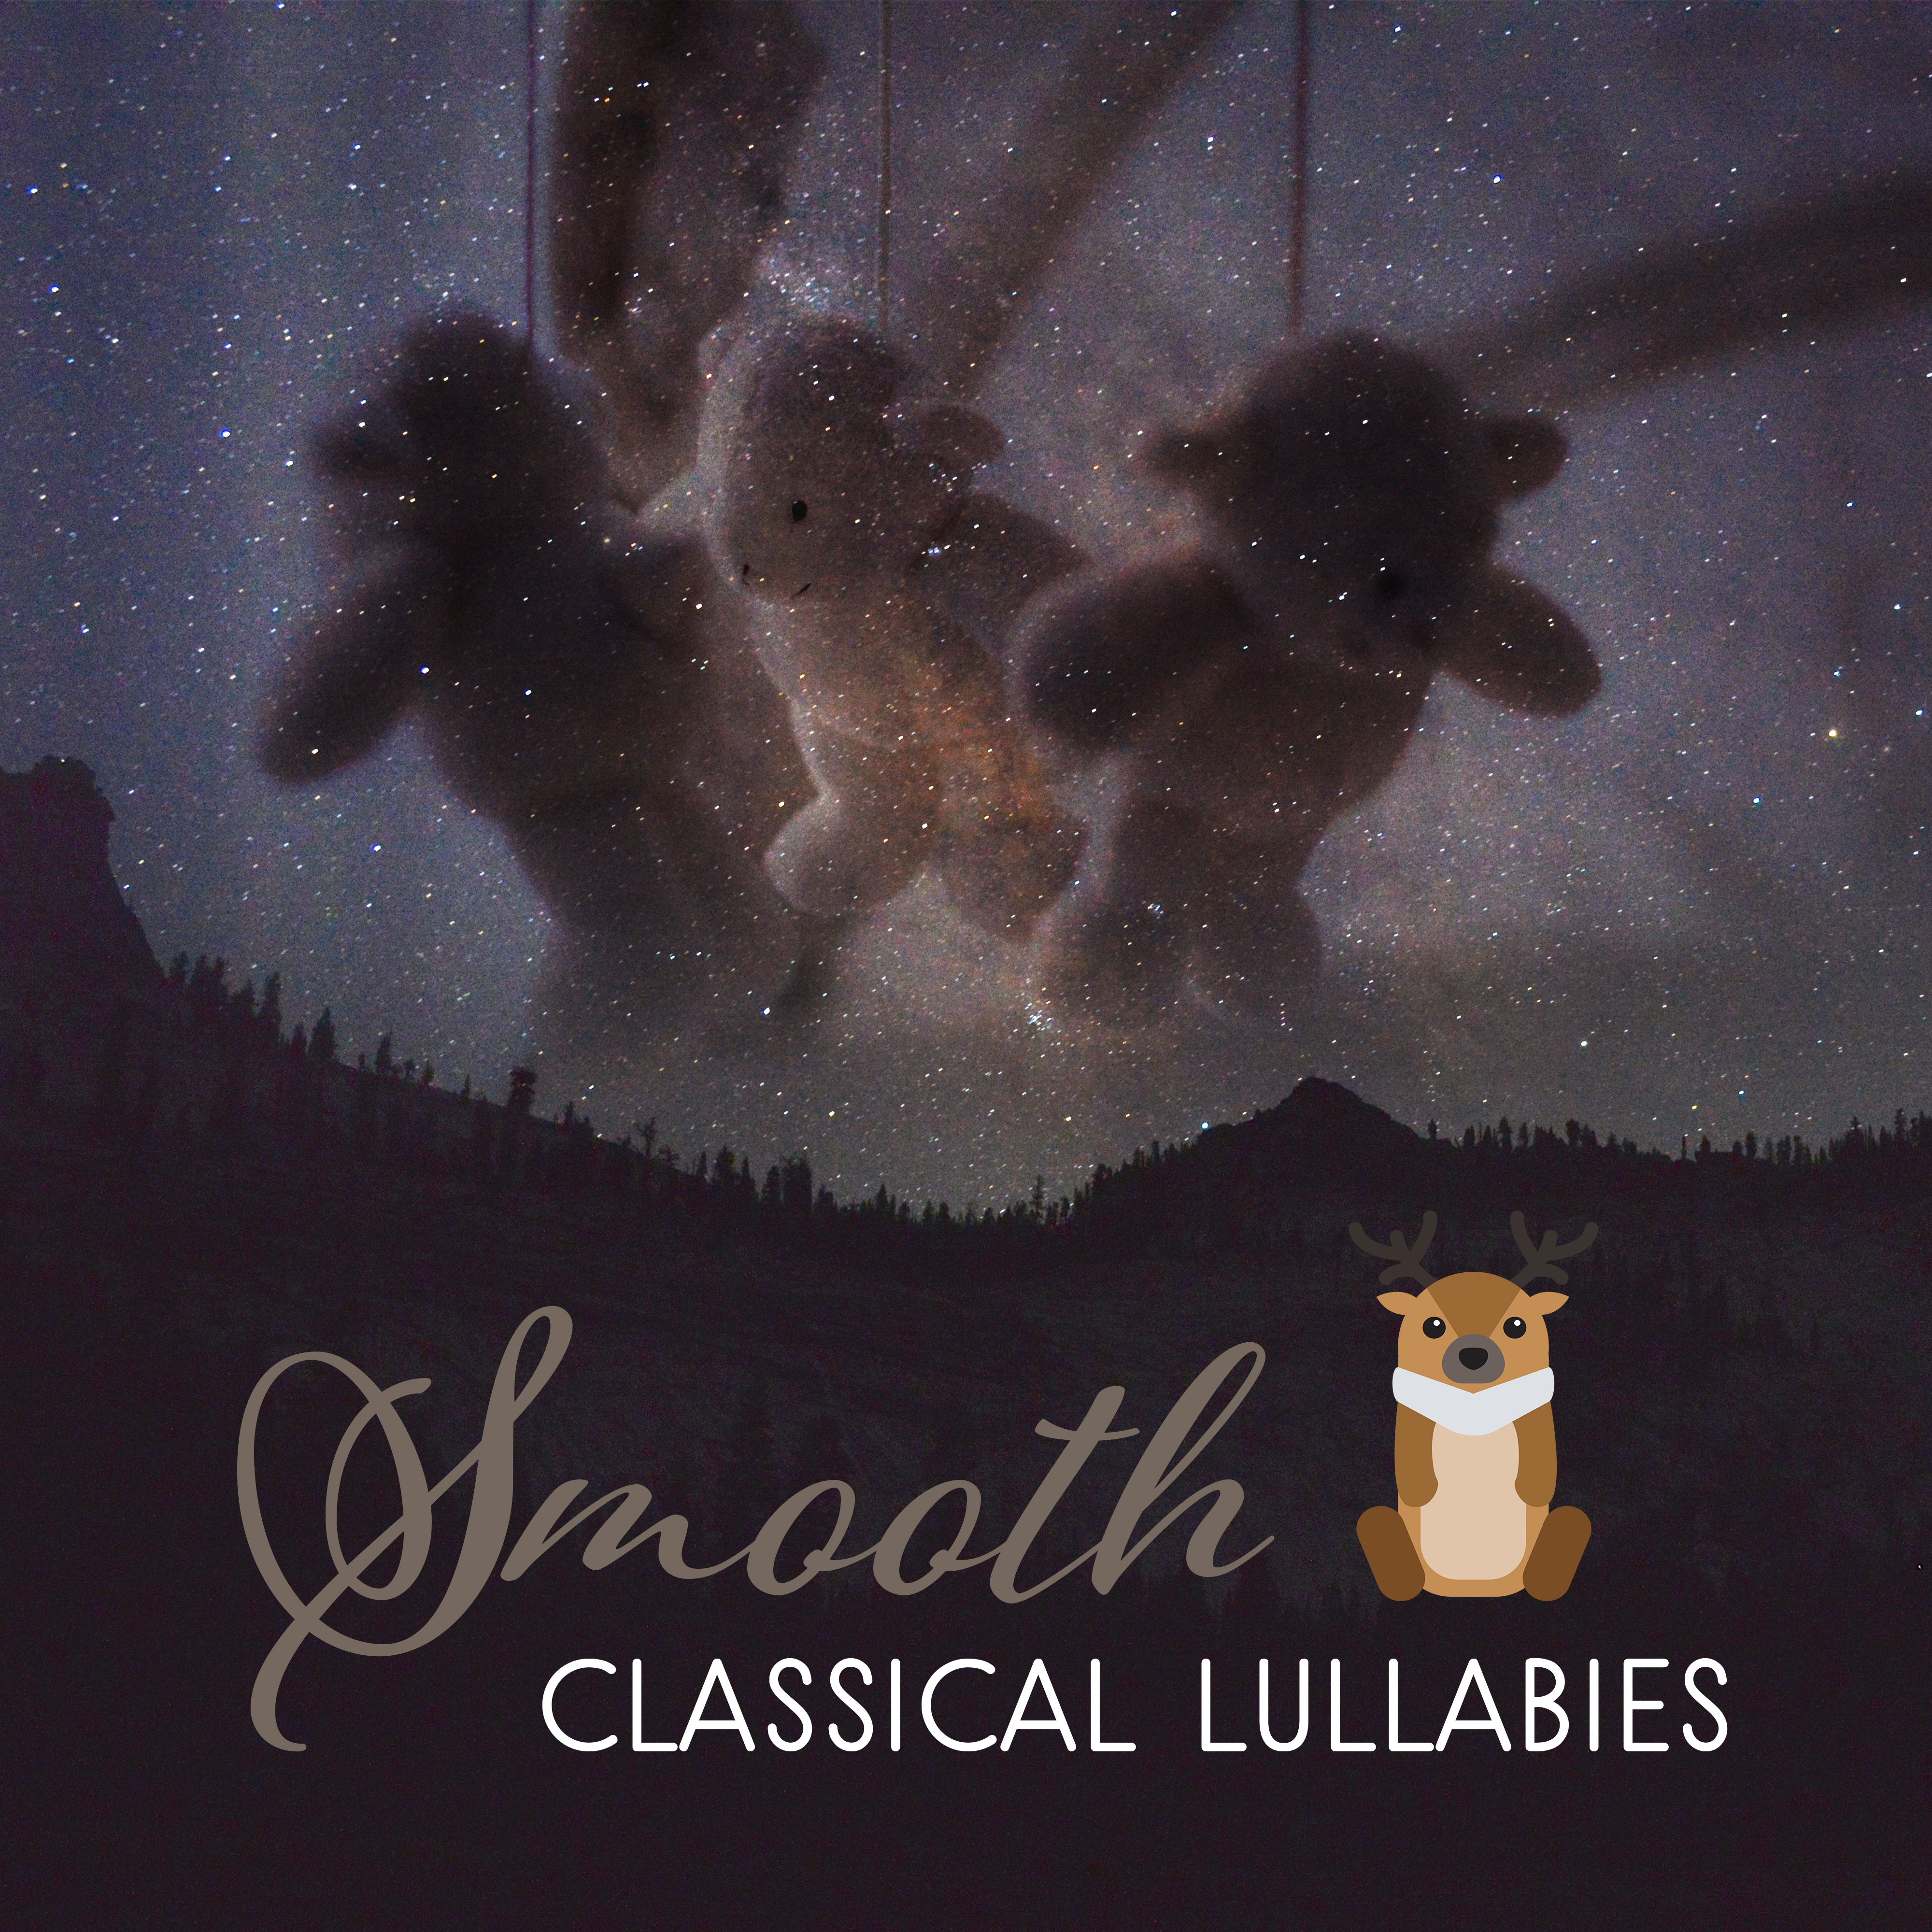 Smooth Classical Lullabies  Amazing Classical Music, Ambient Rest, Bedtime Music, Sweet Songs